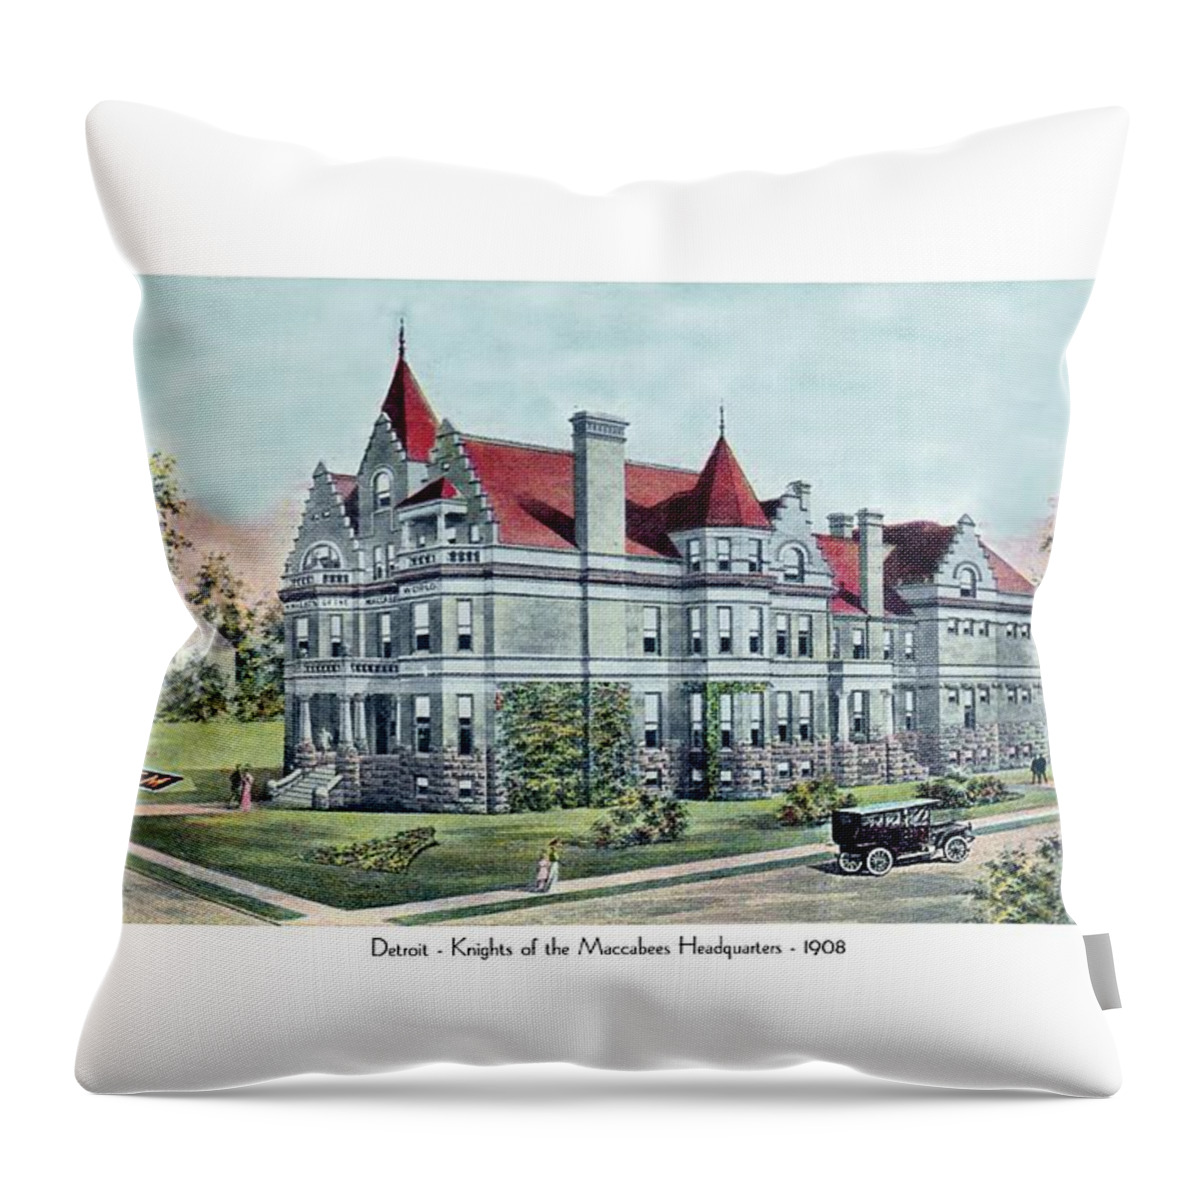 Knights Throw Pillow featuring the digital art Detroit - Knights of the Maccabees Headquarters - 1908 by John Madison